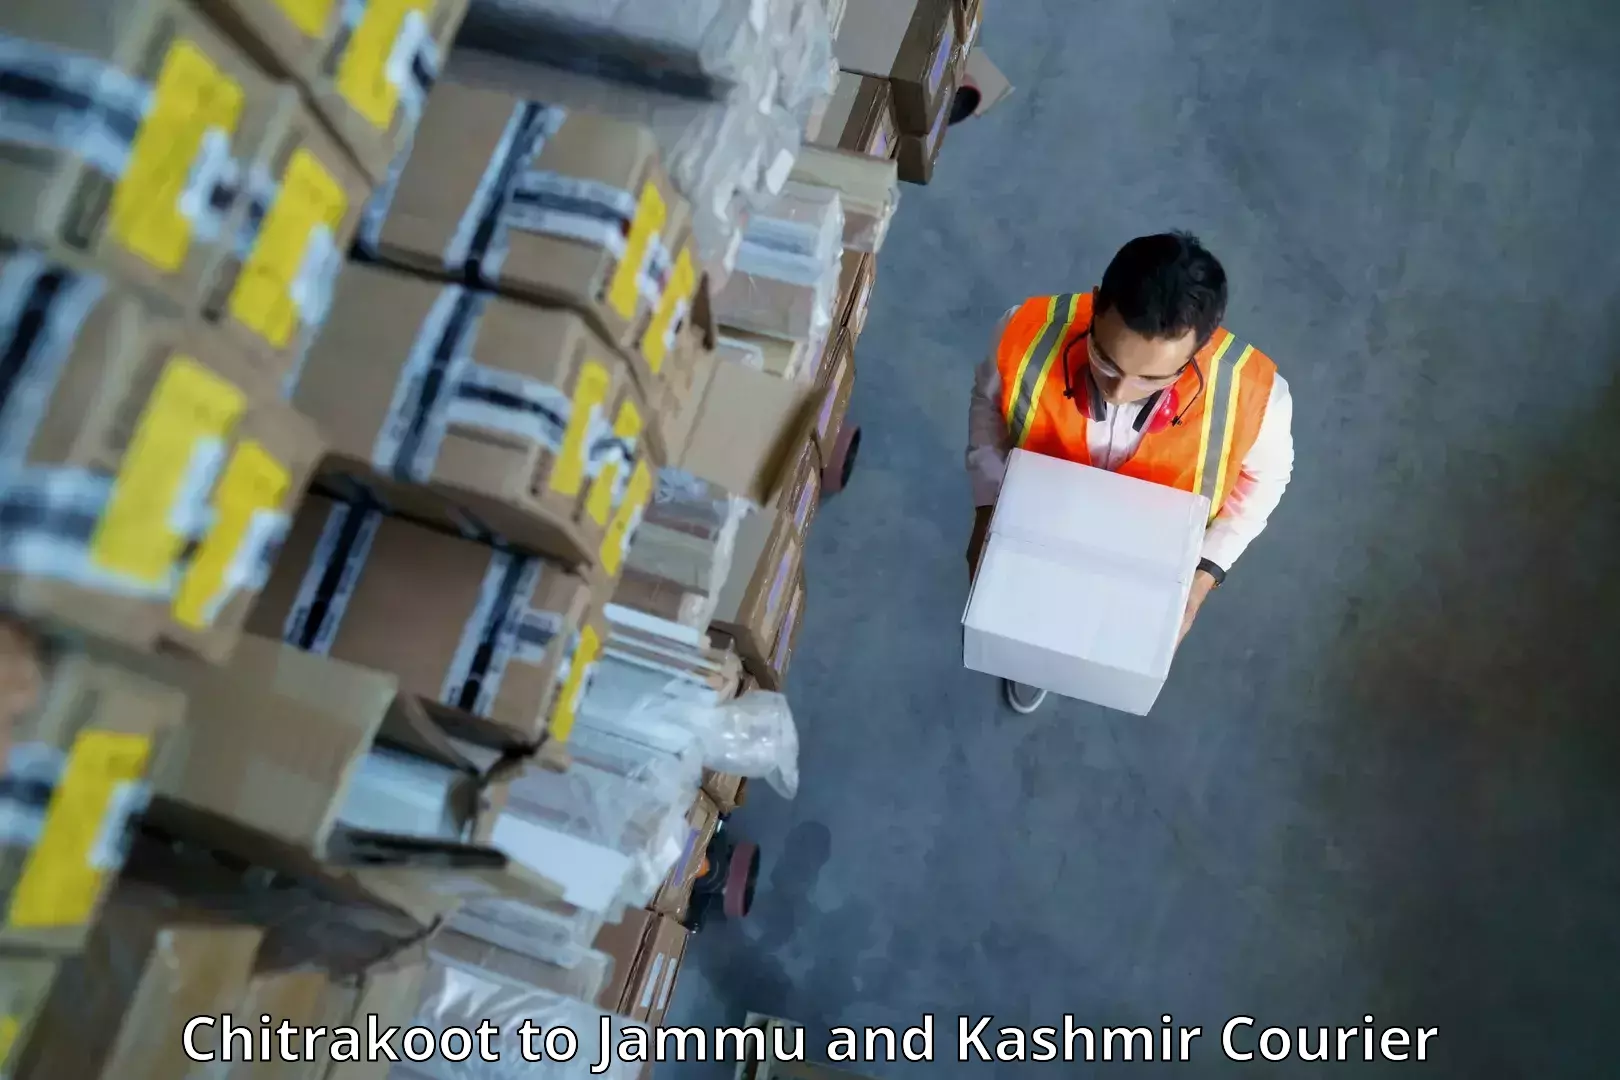 Express delivery network Chitrakoot to Jammu and Kashmir